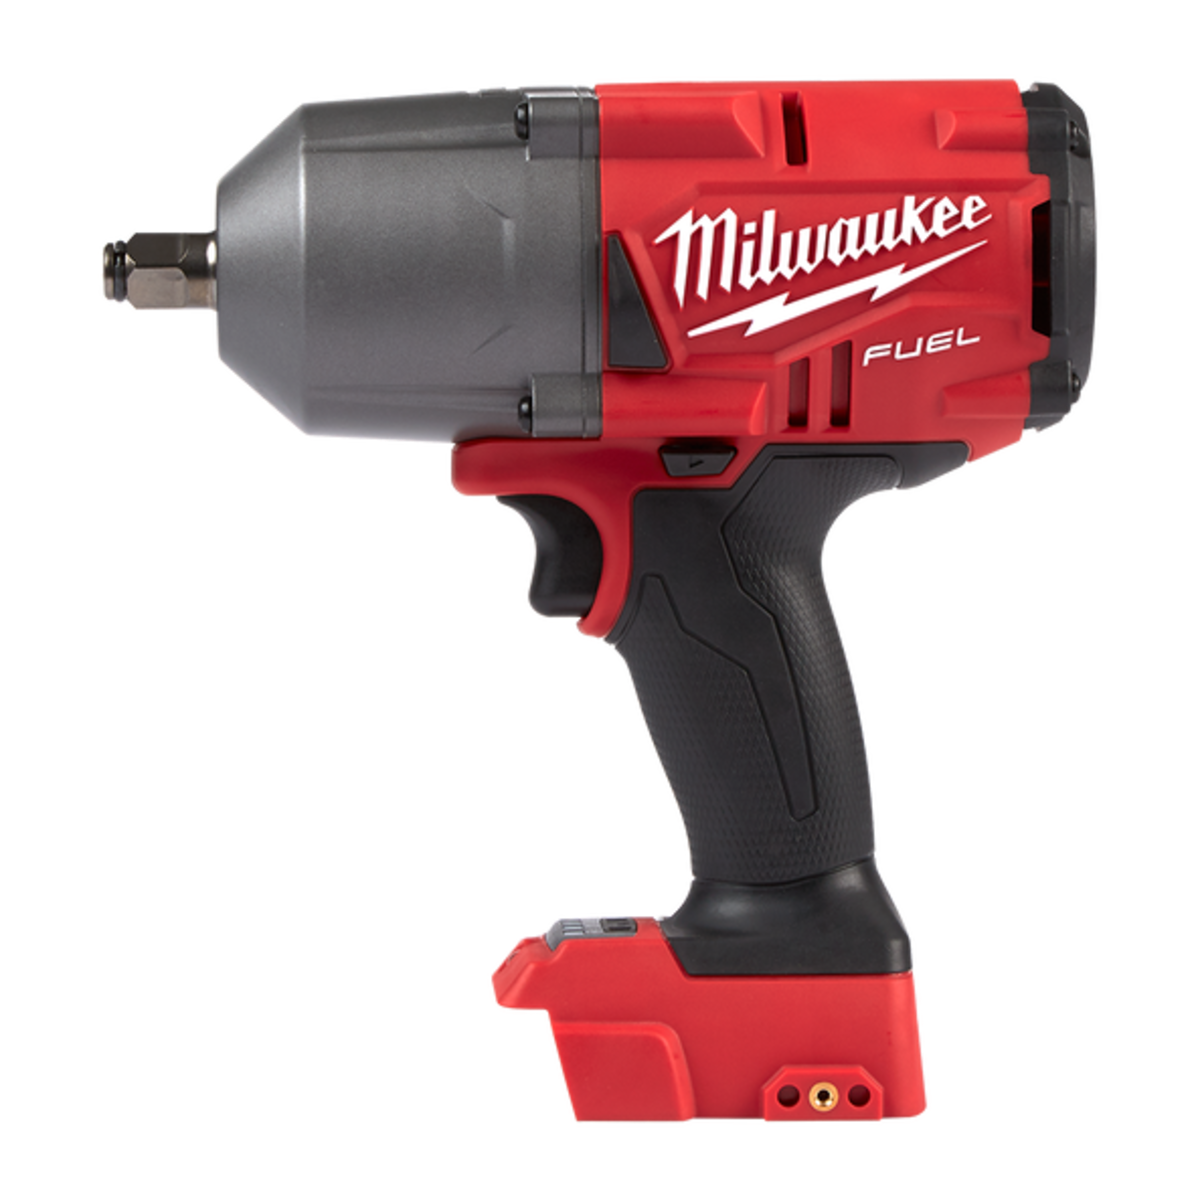 red, black and gray impact wrench